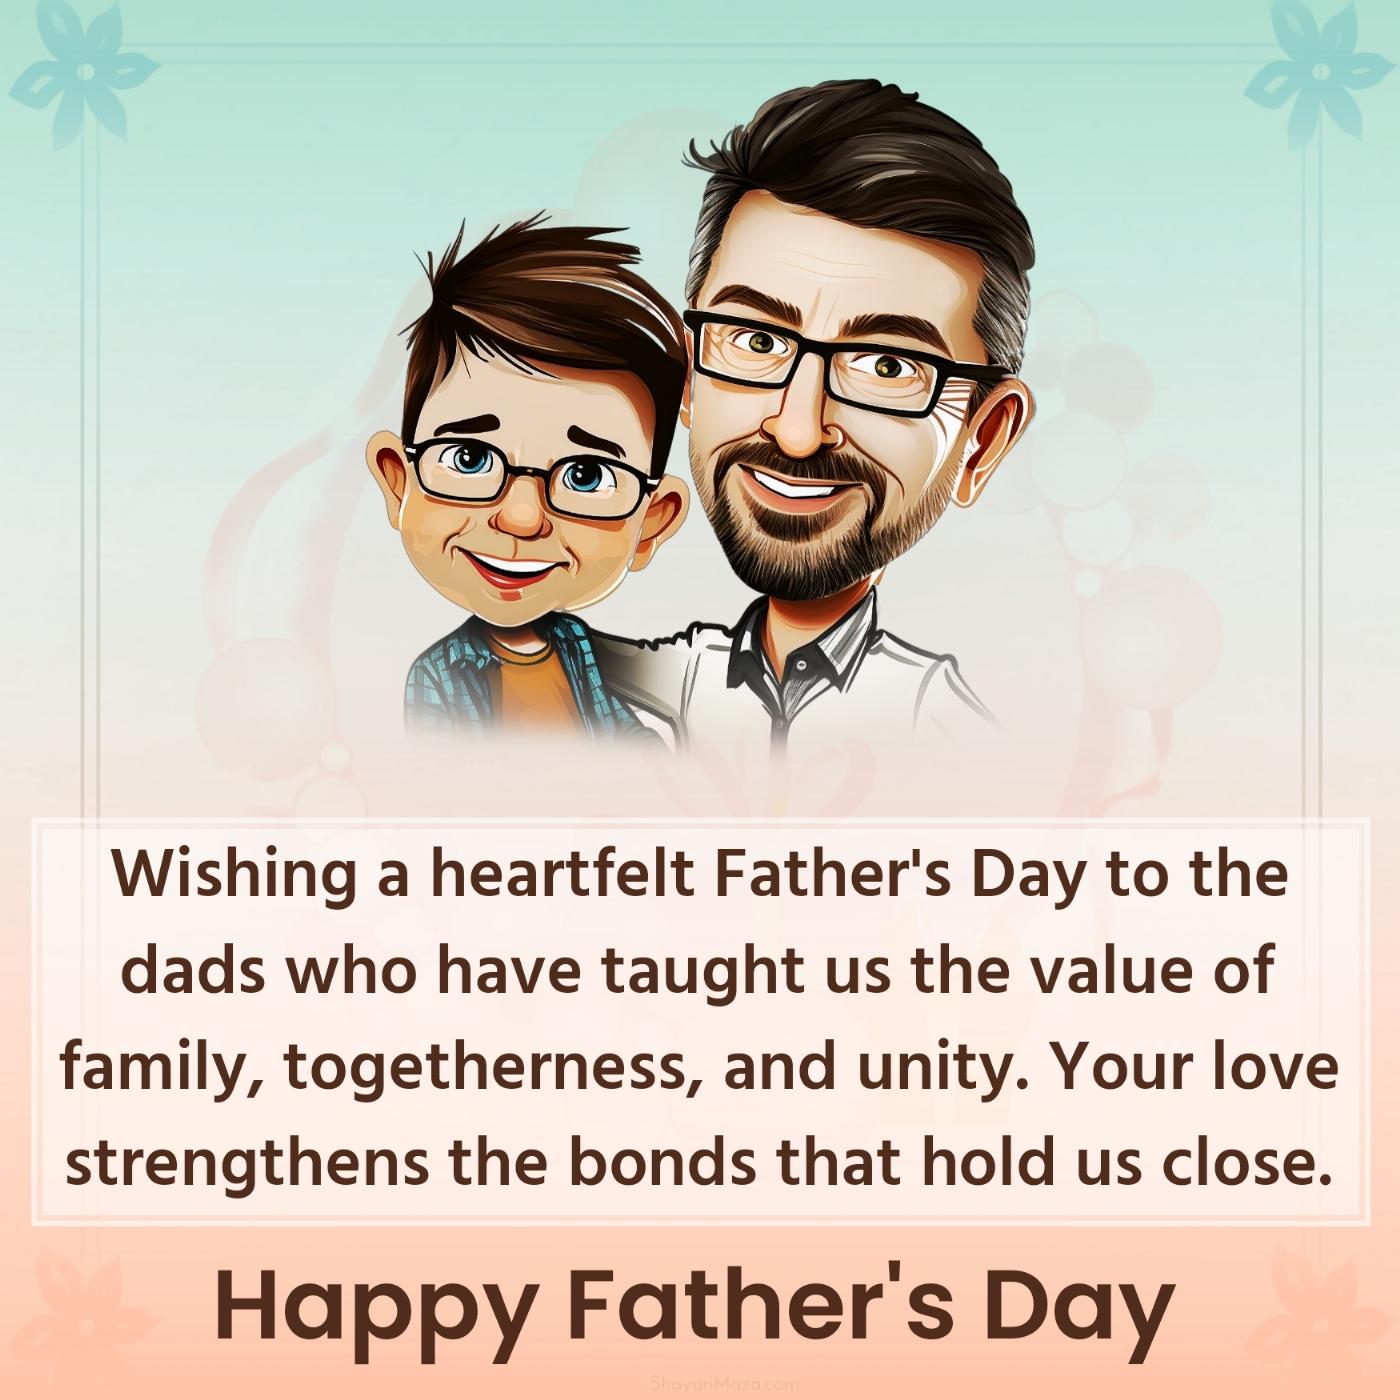 Wishing a heartfelt Father's Day to the dads who have taught us